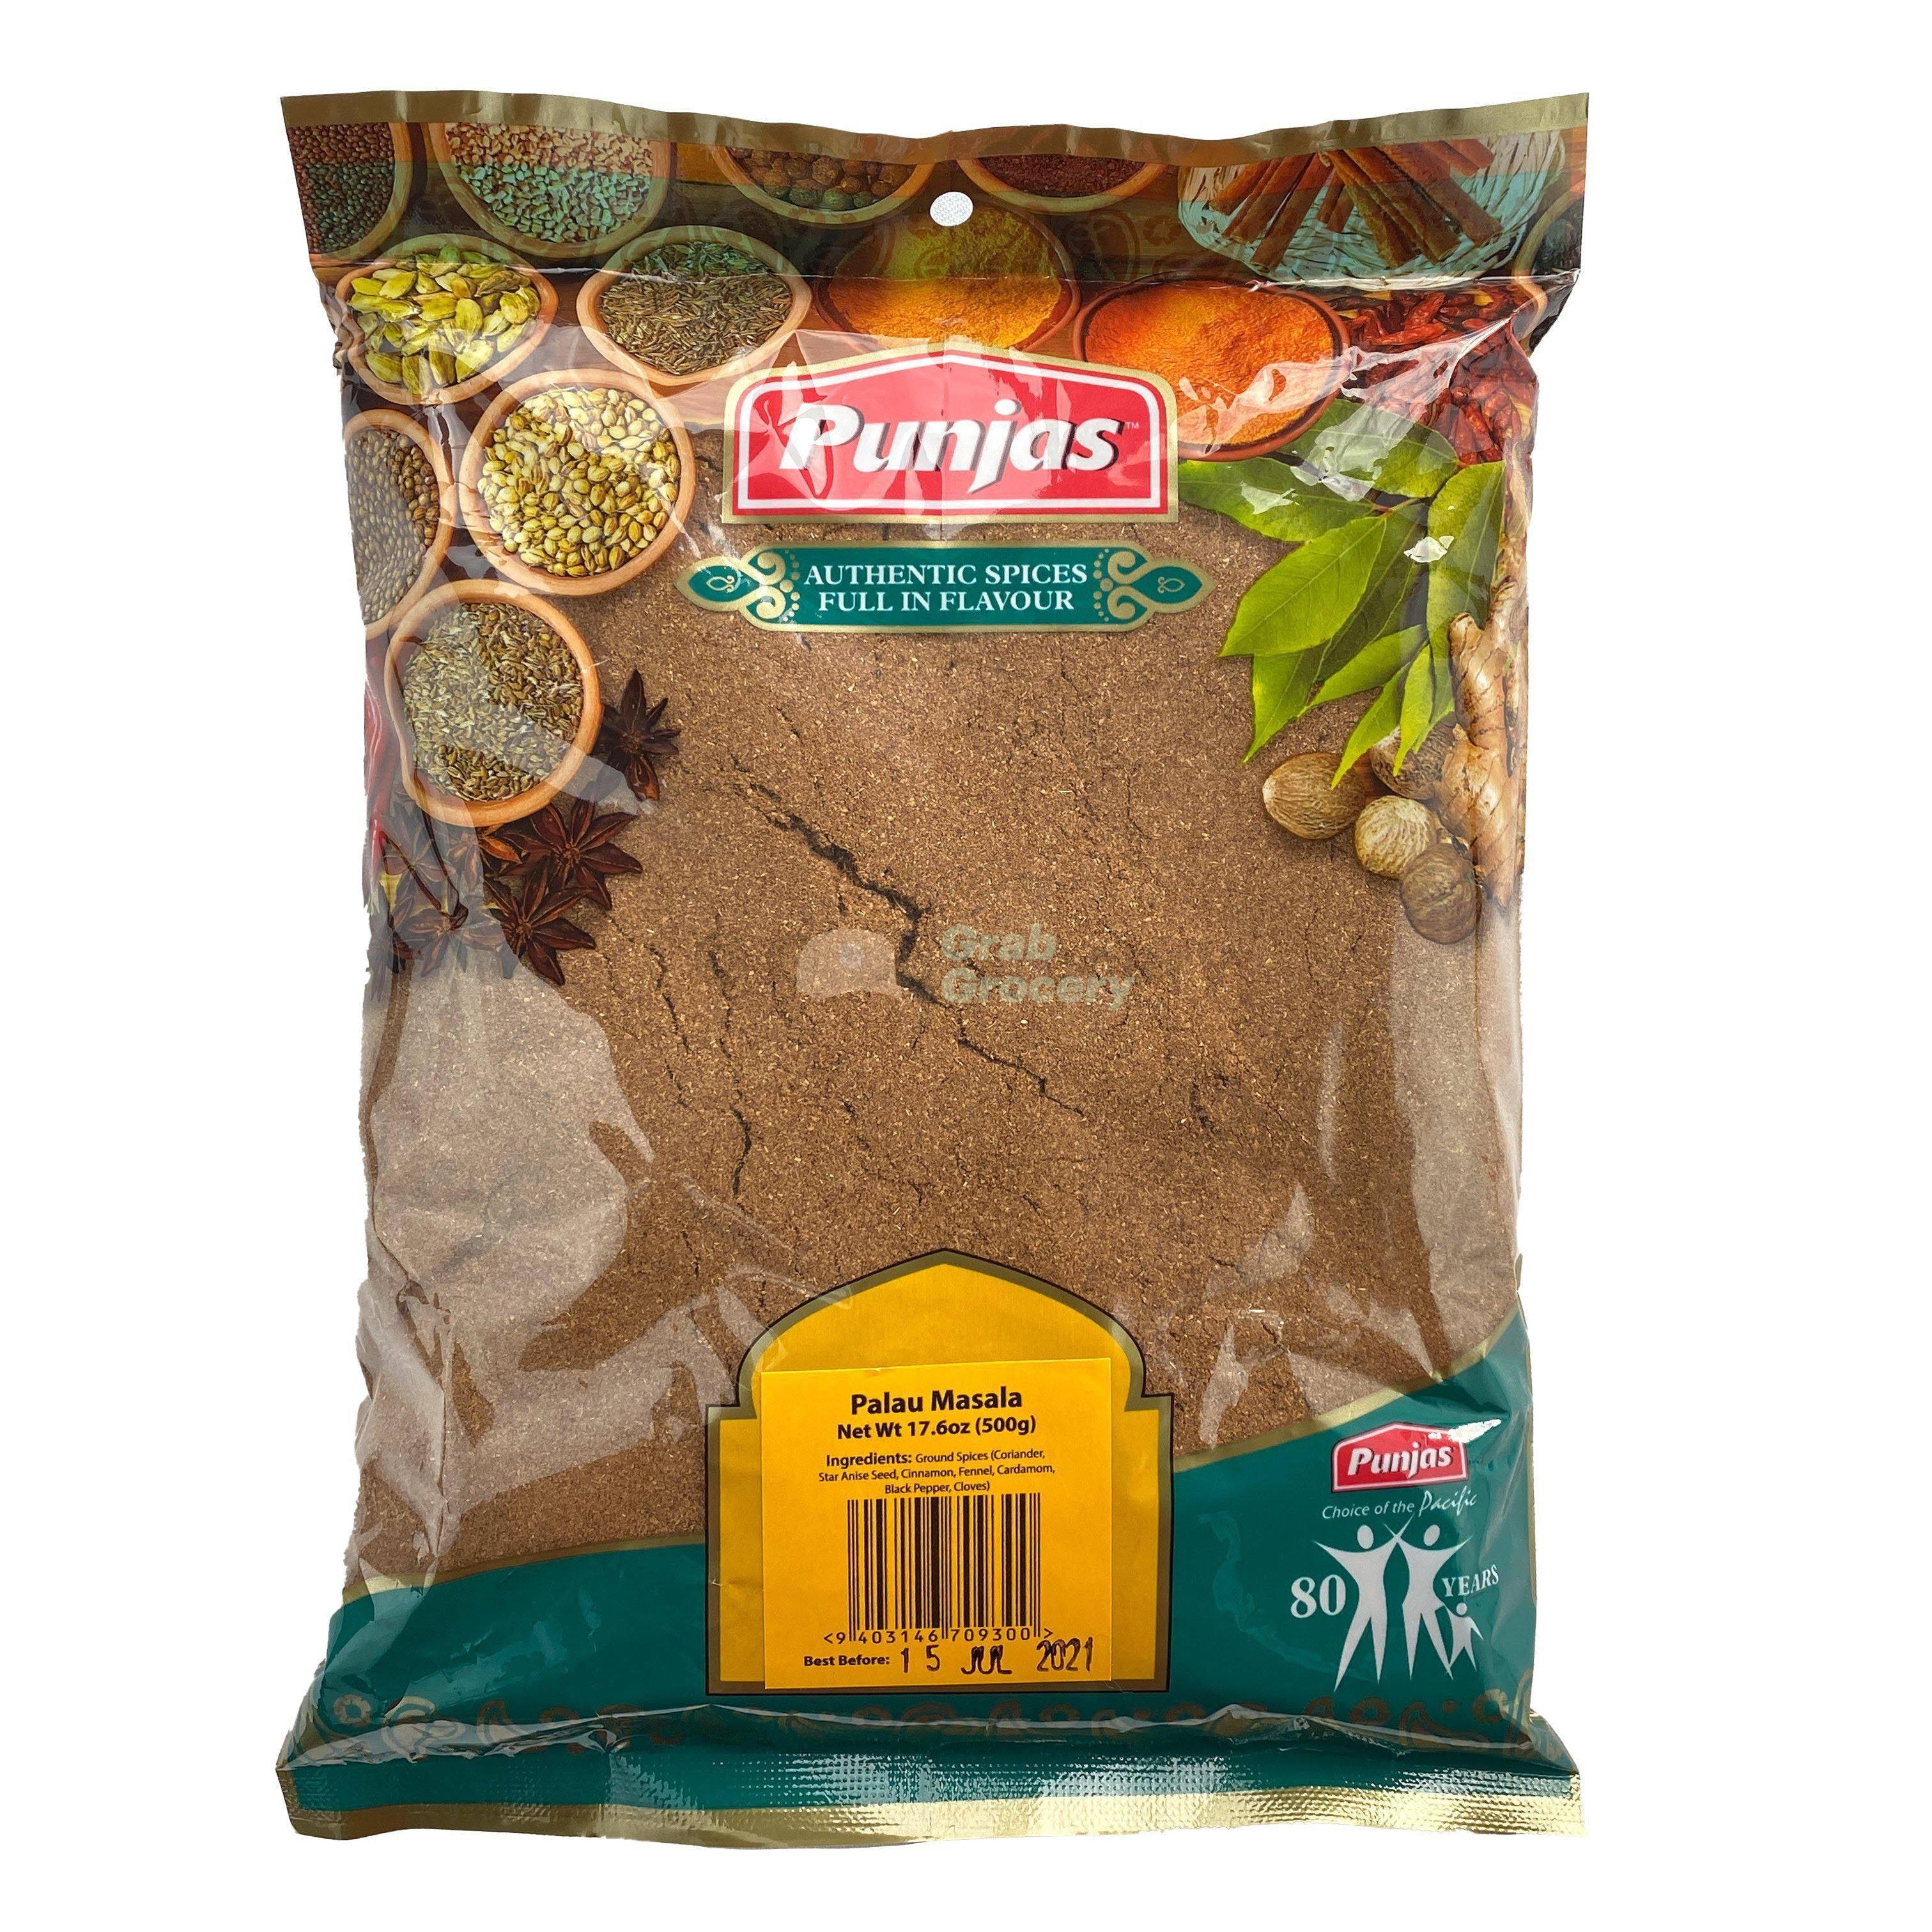 Punjas Pulau Masala - India Grocery and Spice - Delivered by Mercato